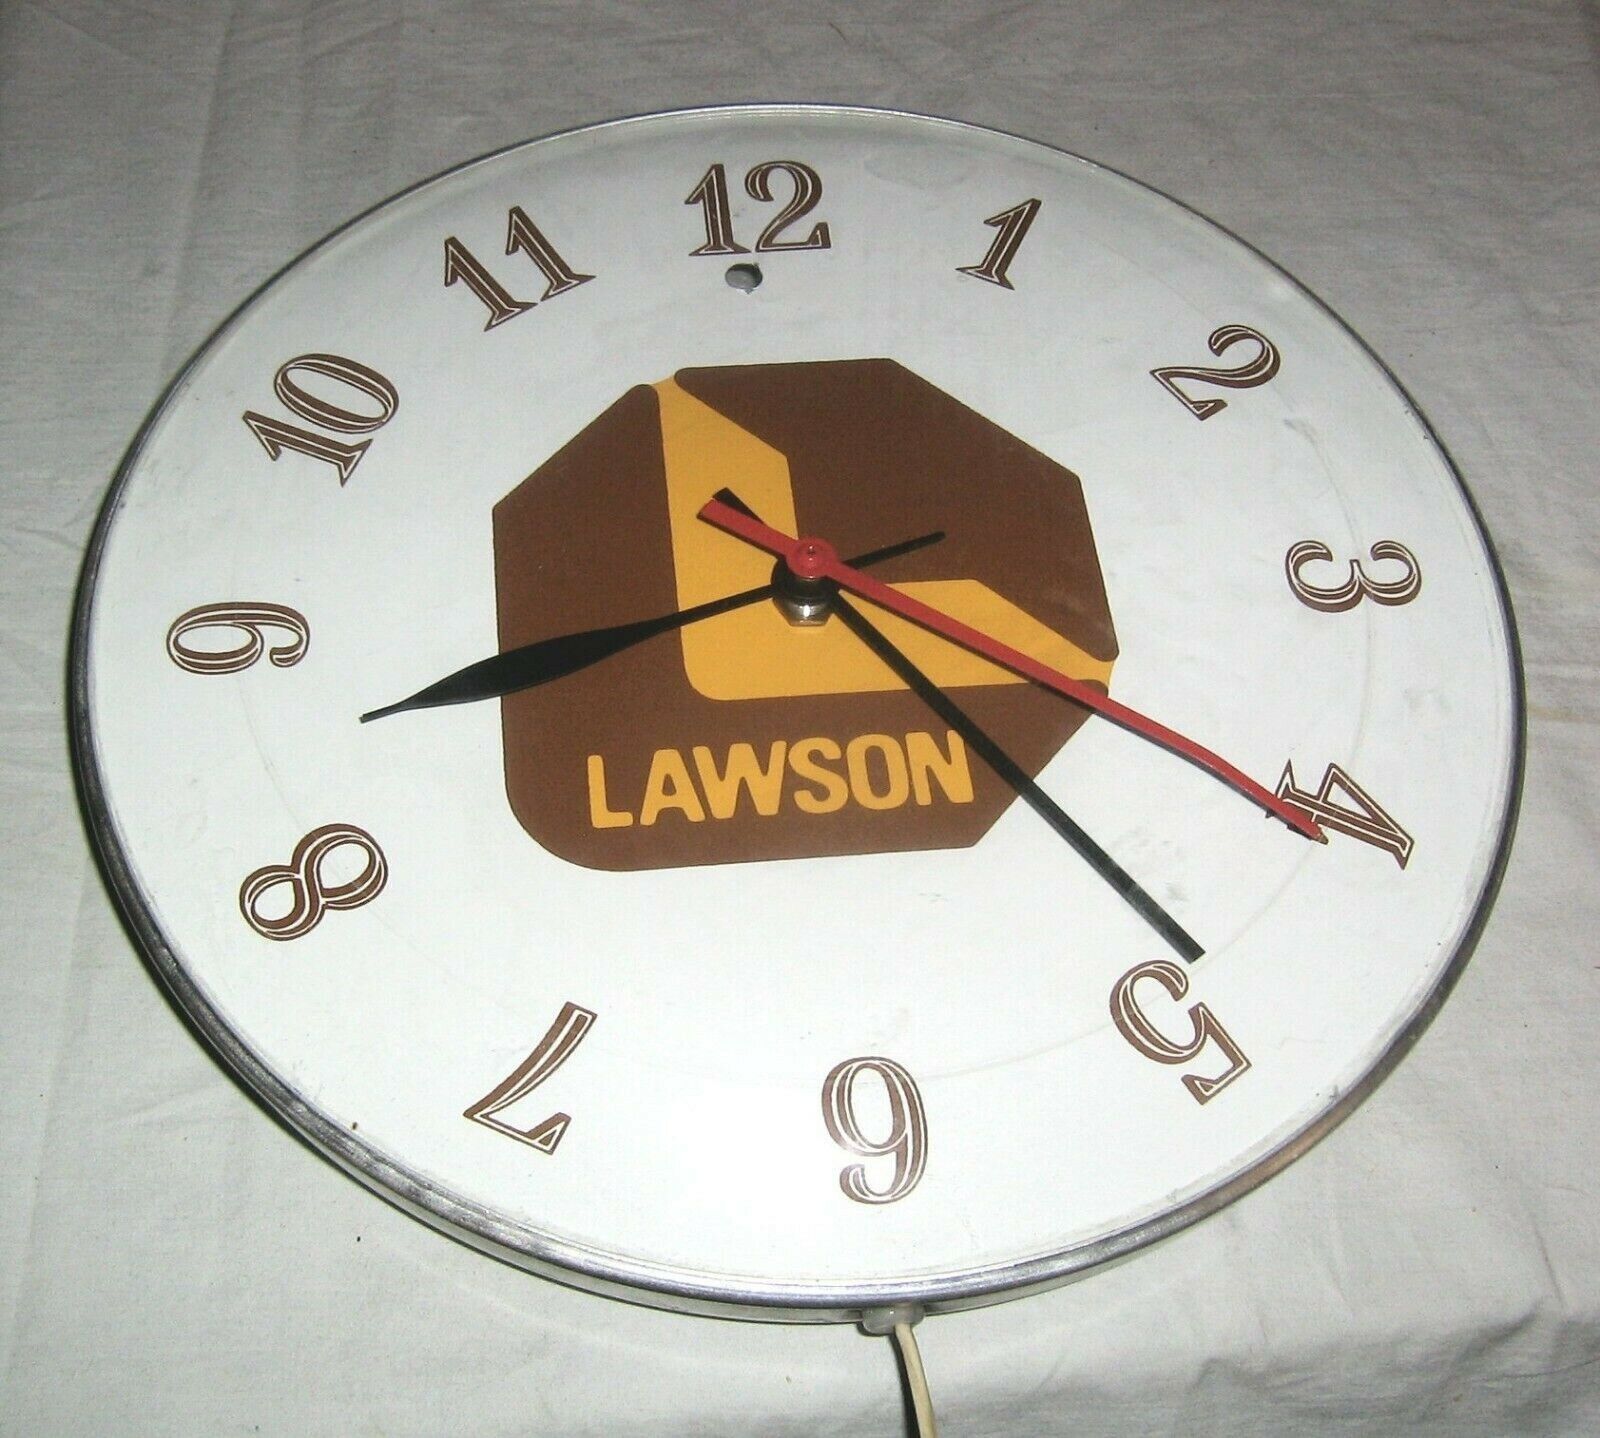 Lawson,Chicago based 1950's Construction Co.advertising glass face working clock